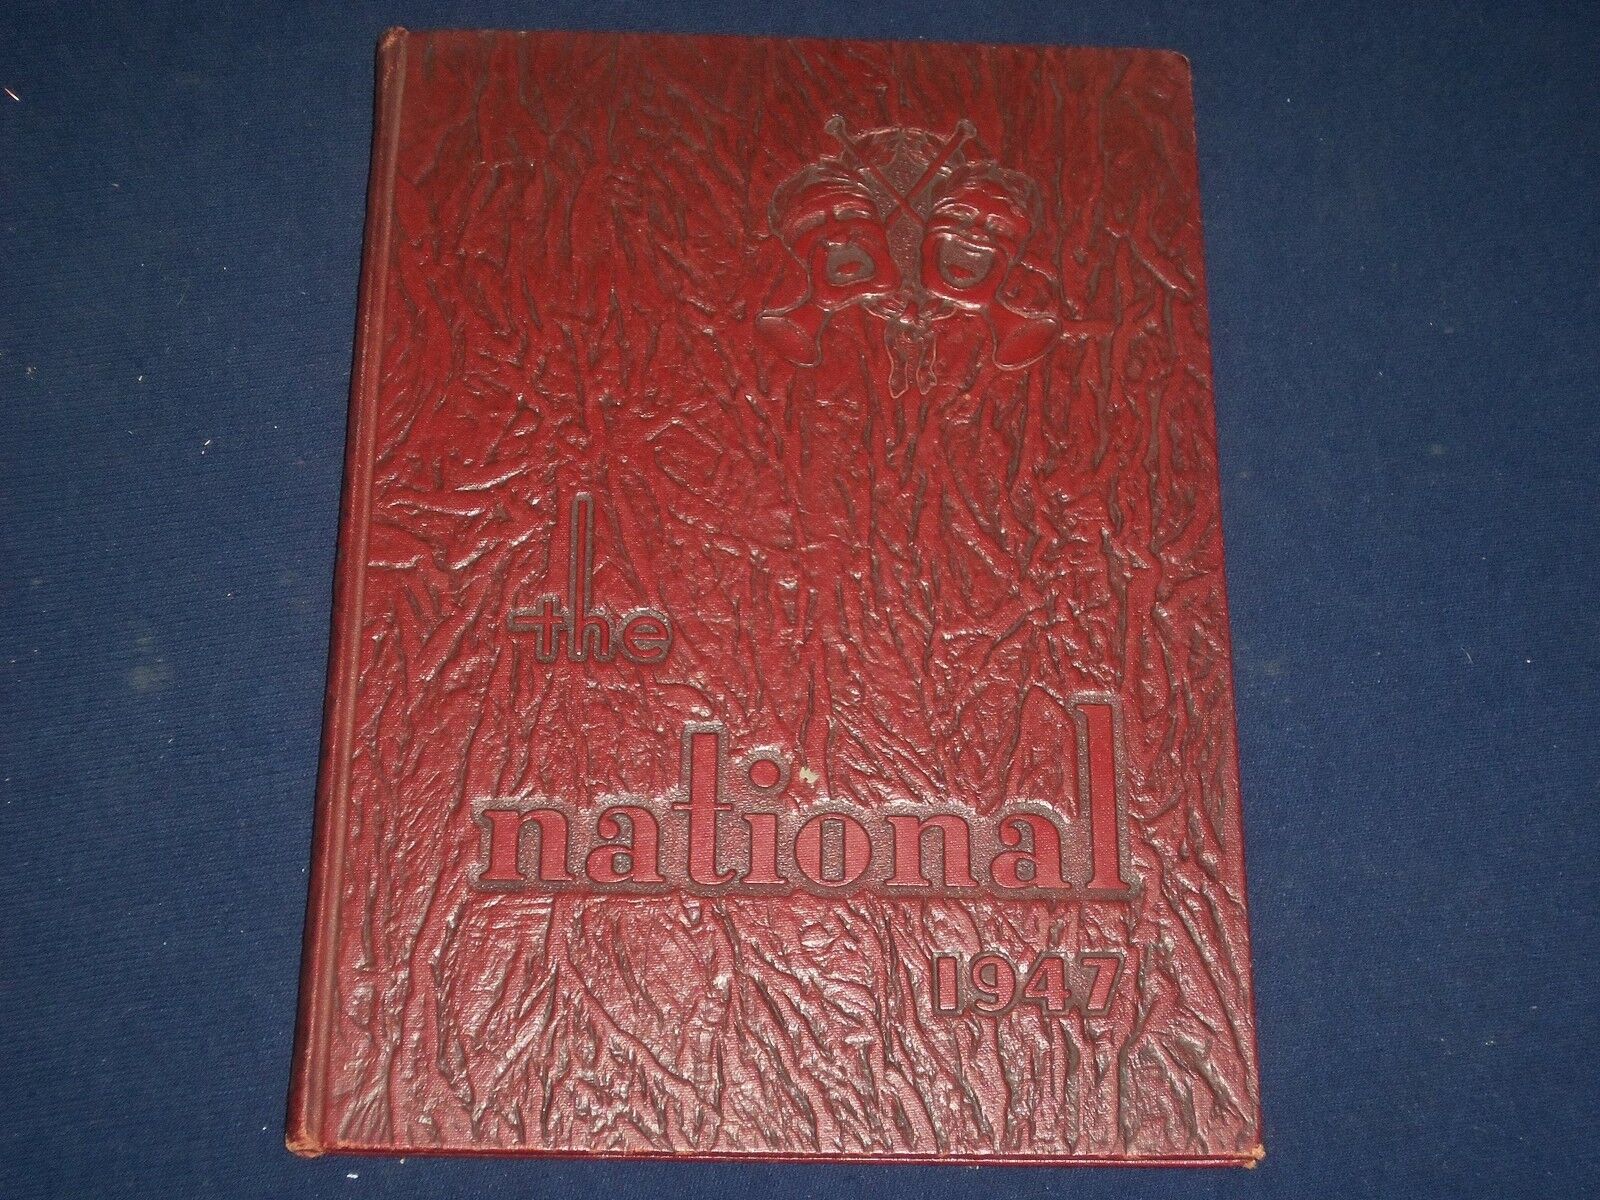 1947 THE NATIONAL COLLEGE OF EDUCATION YEARBOOK - EVANSTON ILLINOIS - YB 842